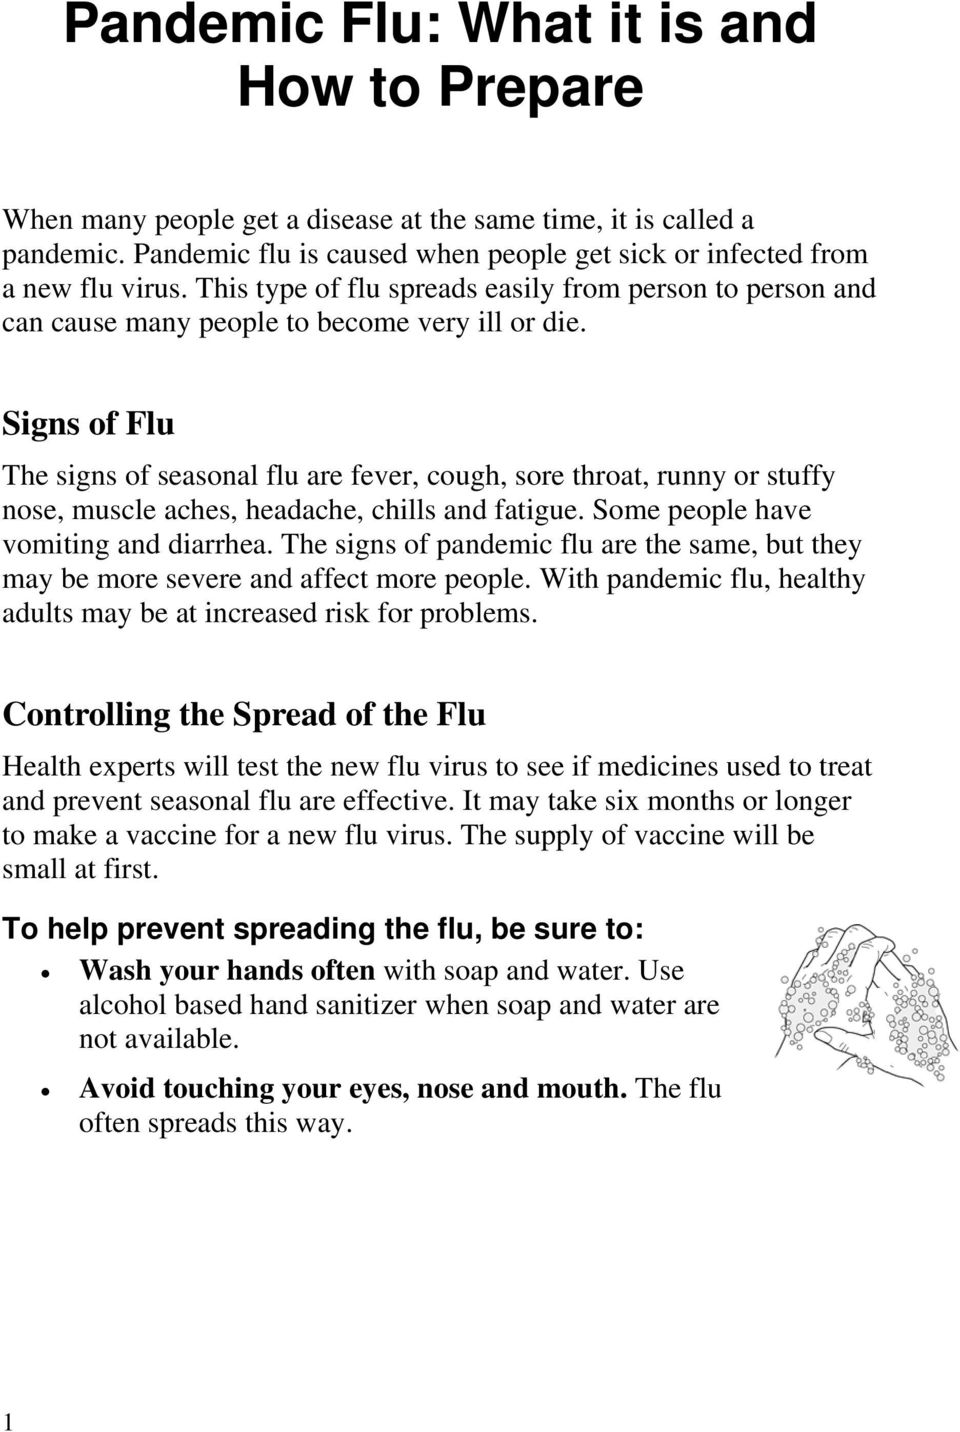 Signs of Flu The signs of seasonal flu are fever, cough, sore throat, runny or stuffy nose, muscle aches, headache, chills and fatigue. Some people have vomiting and diarrhea.